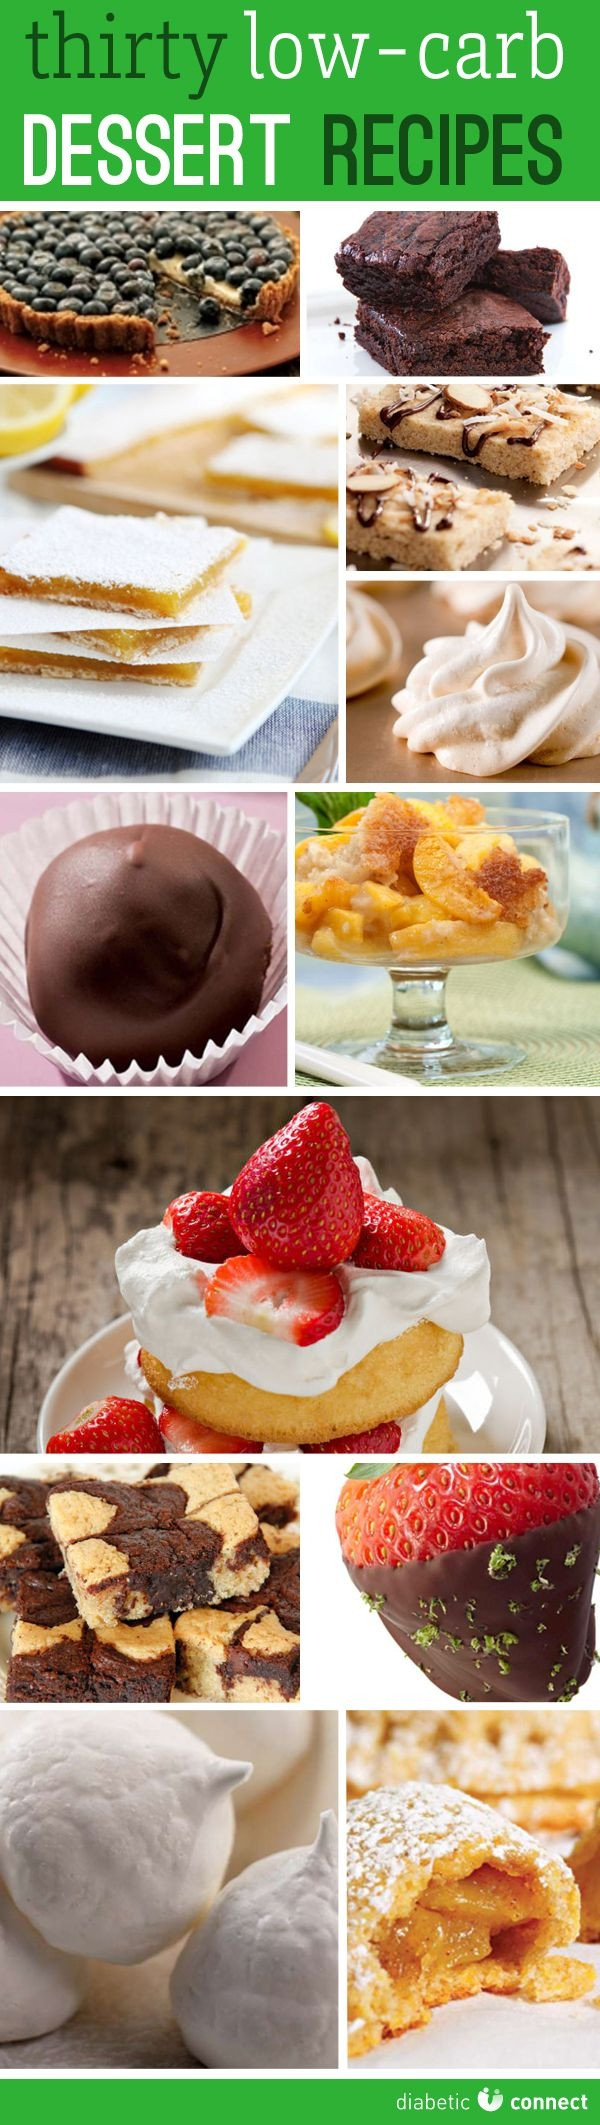 Low Carb Summer Recipes top 20 30 Low Carb Dessert Recipes A Great Go to List Of Recipes